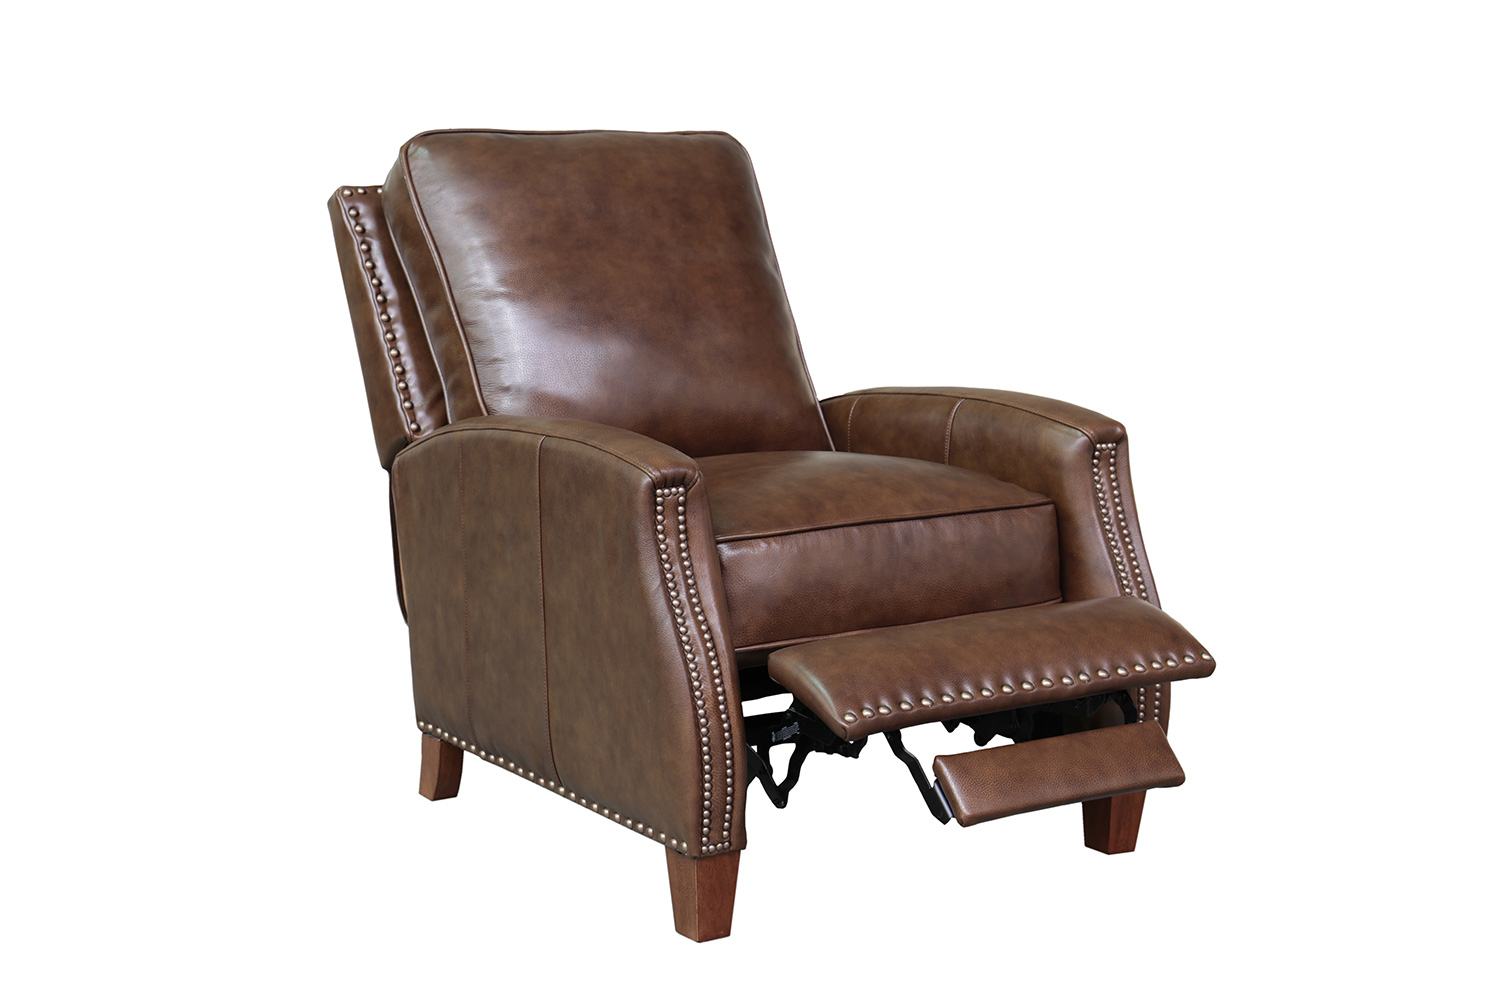 Barcalounger Melrose Recliner Chair - Wenlock Double Chocolate/All Leather